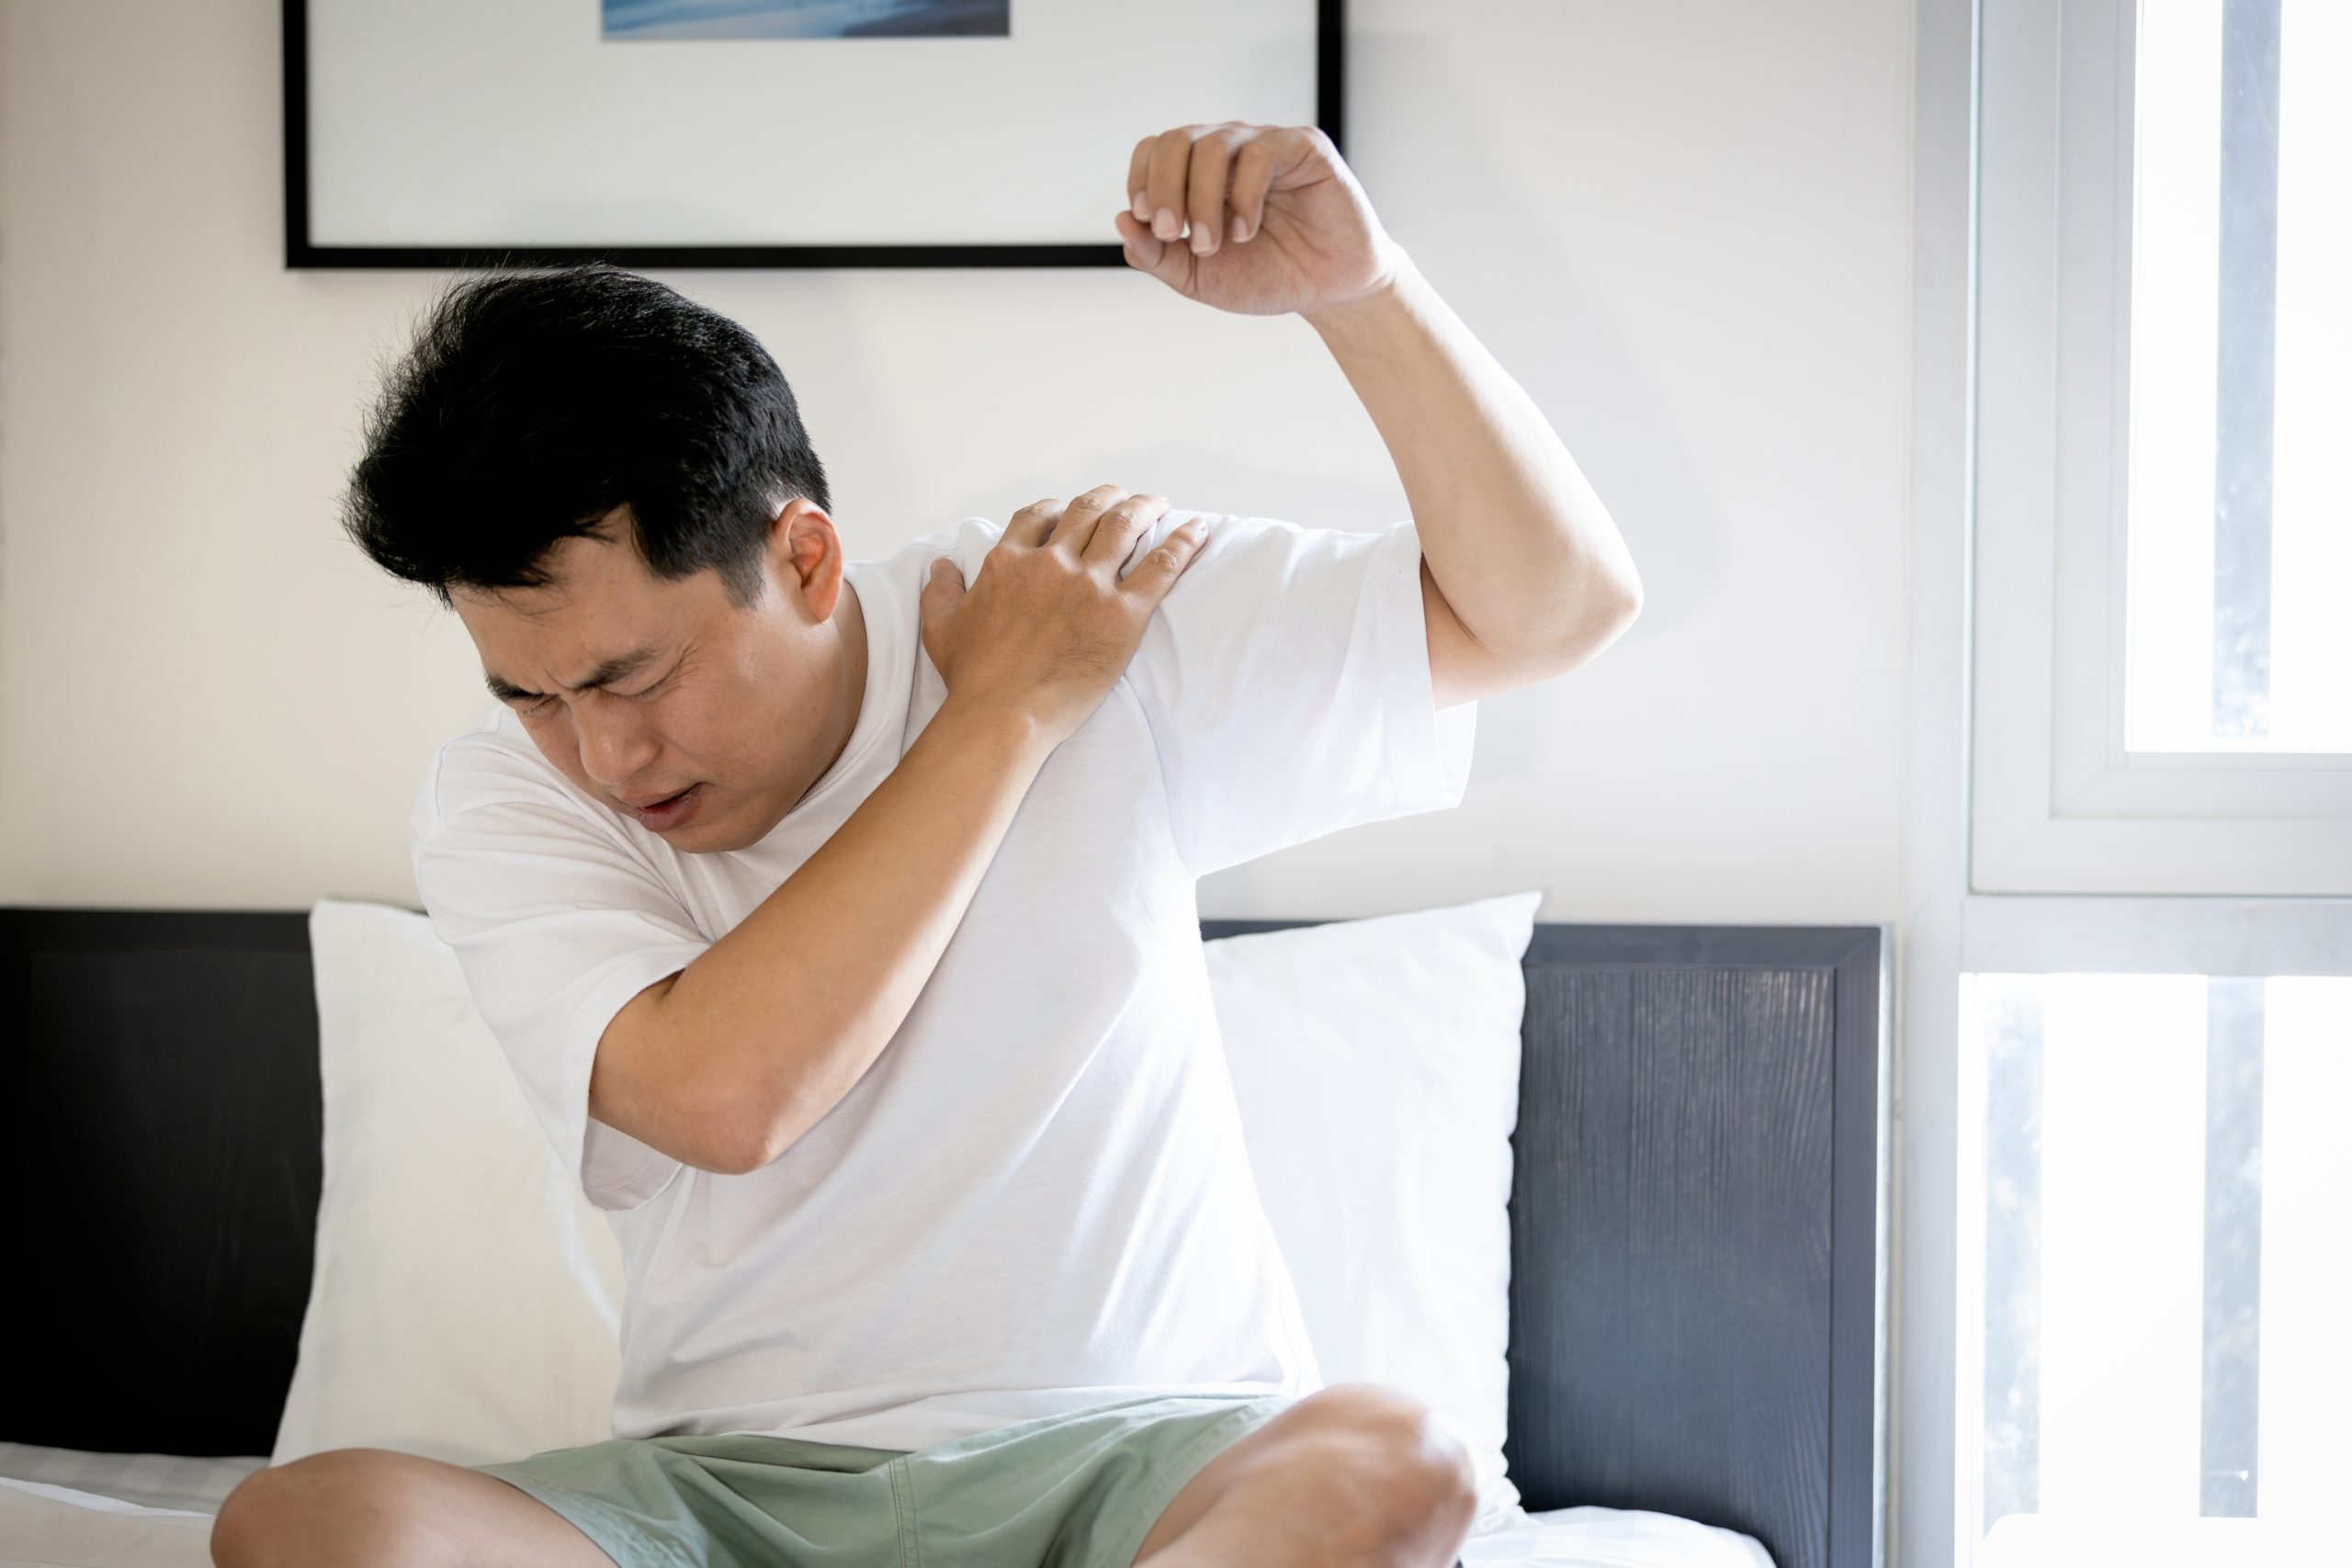 Chiropractic Care For Shoulder Pain Near Everett, WA